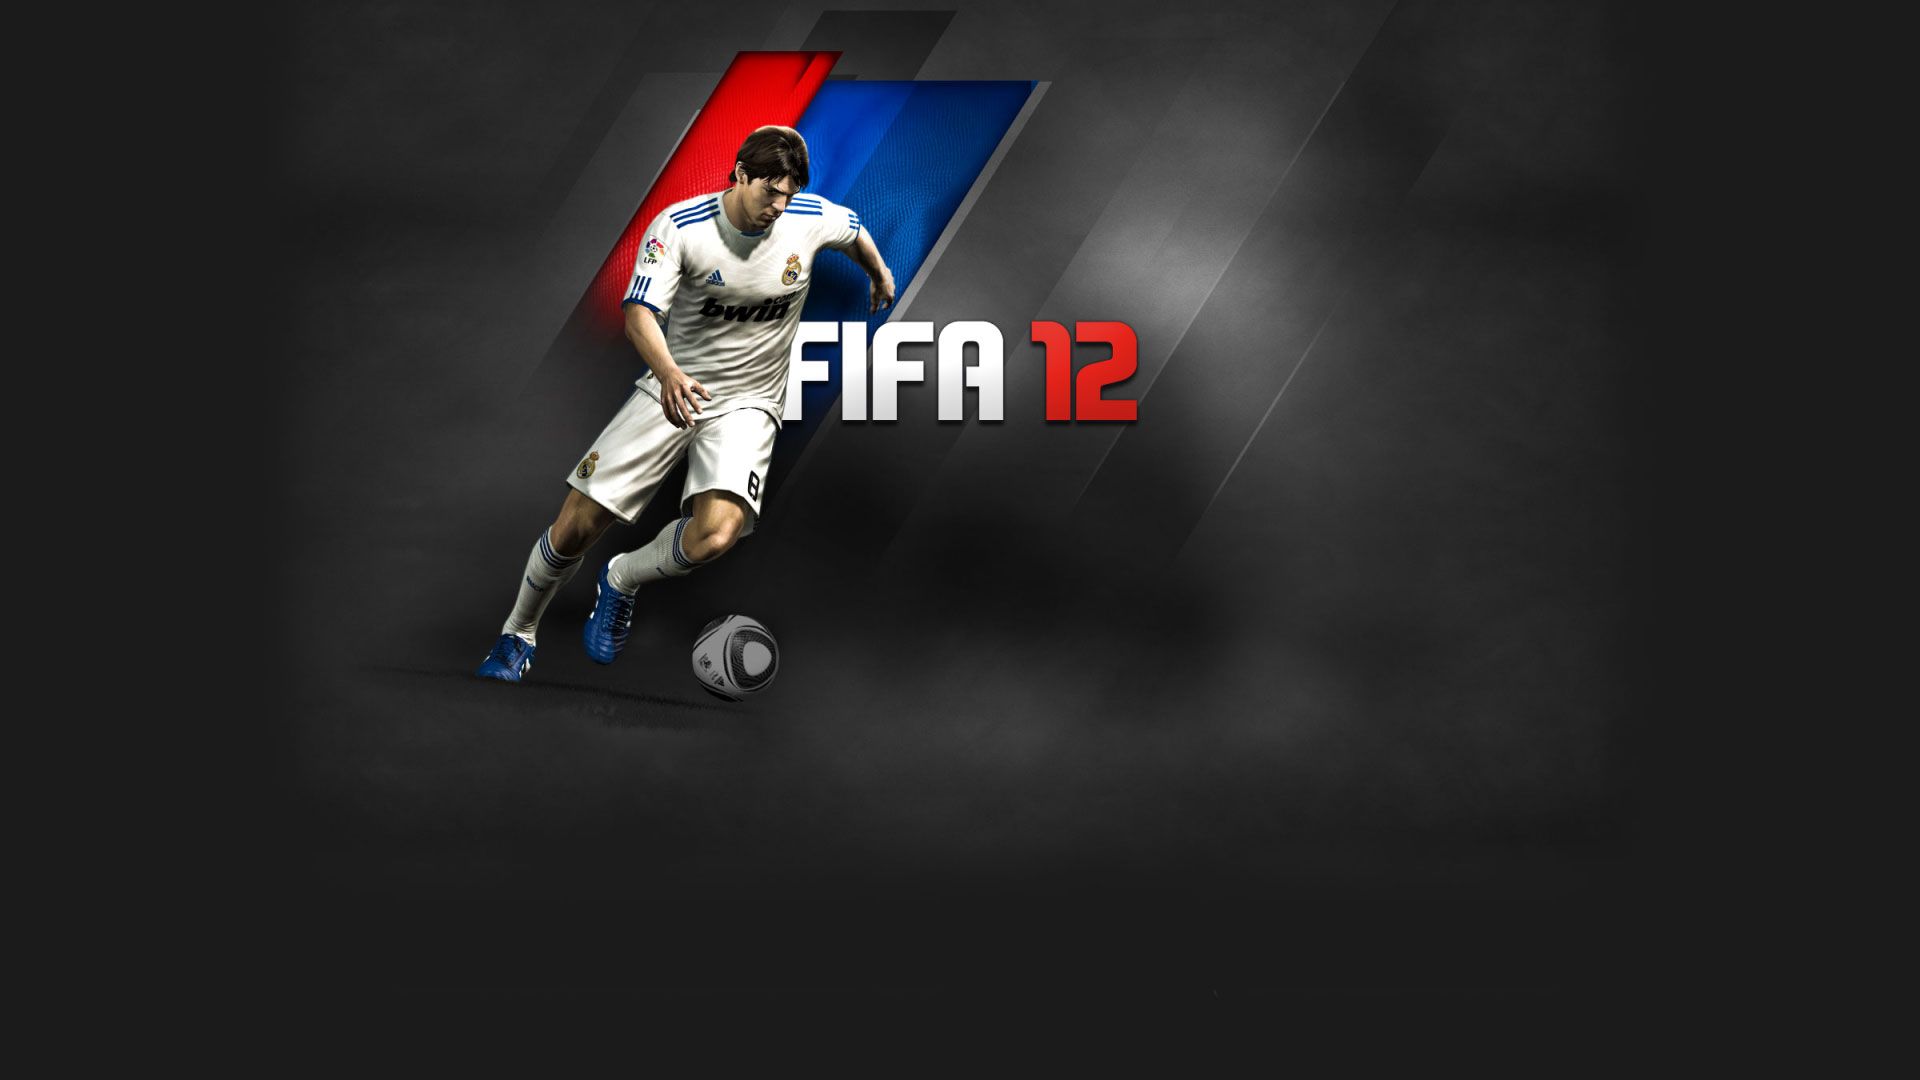 Free download FIFA 12 Wallpaper Gaming Now [1920x1080]